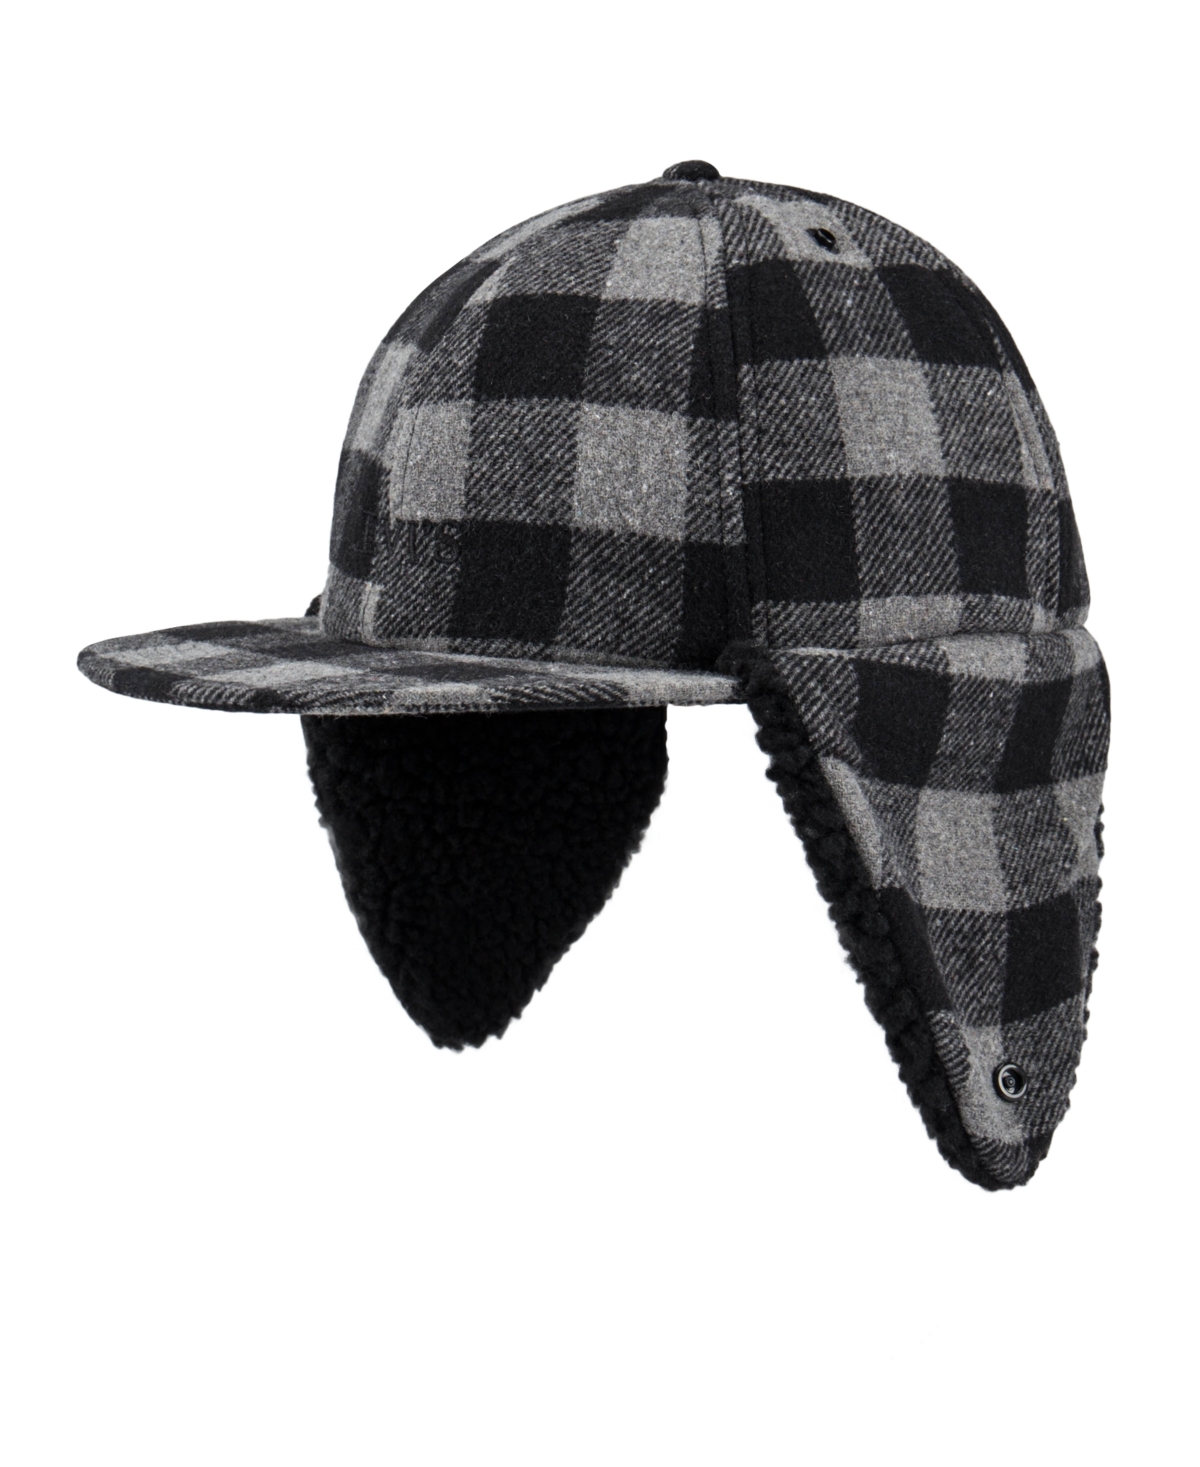 Men's Corduroy and Sherpa Hunter Hat with Ear Flaps - Black